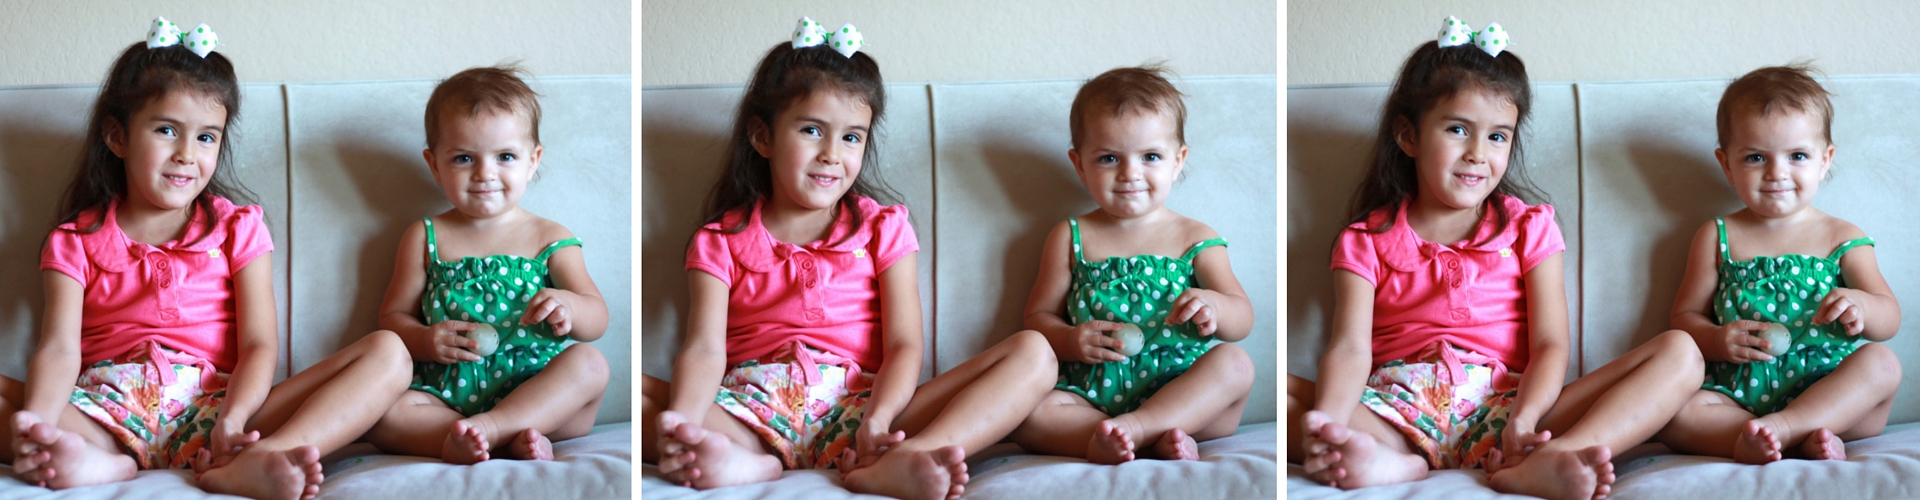 Cora and Issa love Loteda – Children’s clothing made convenient and cute!